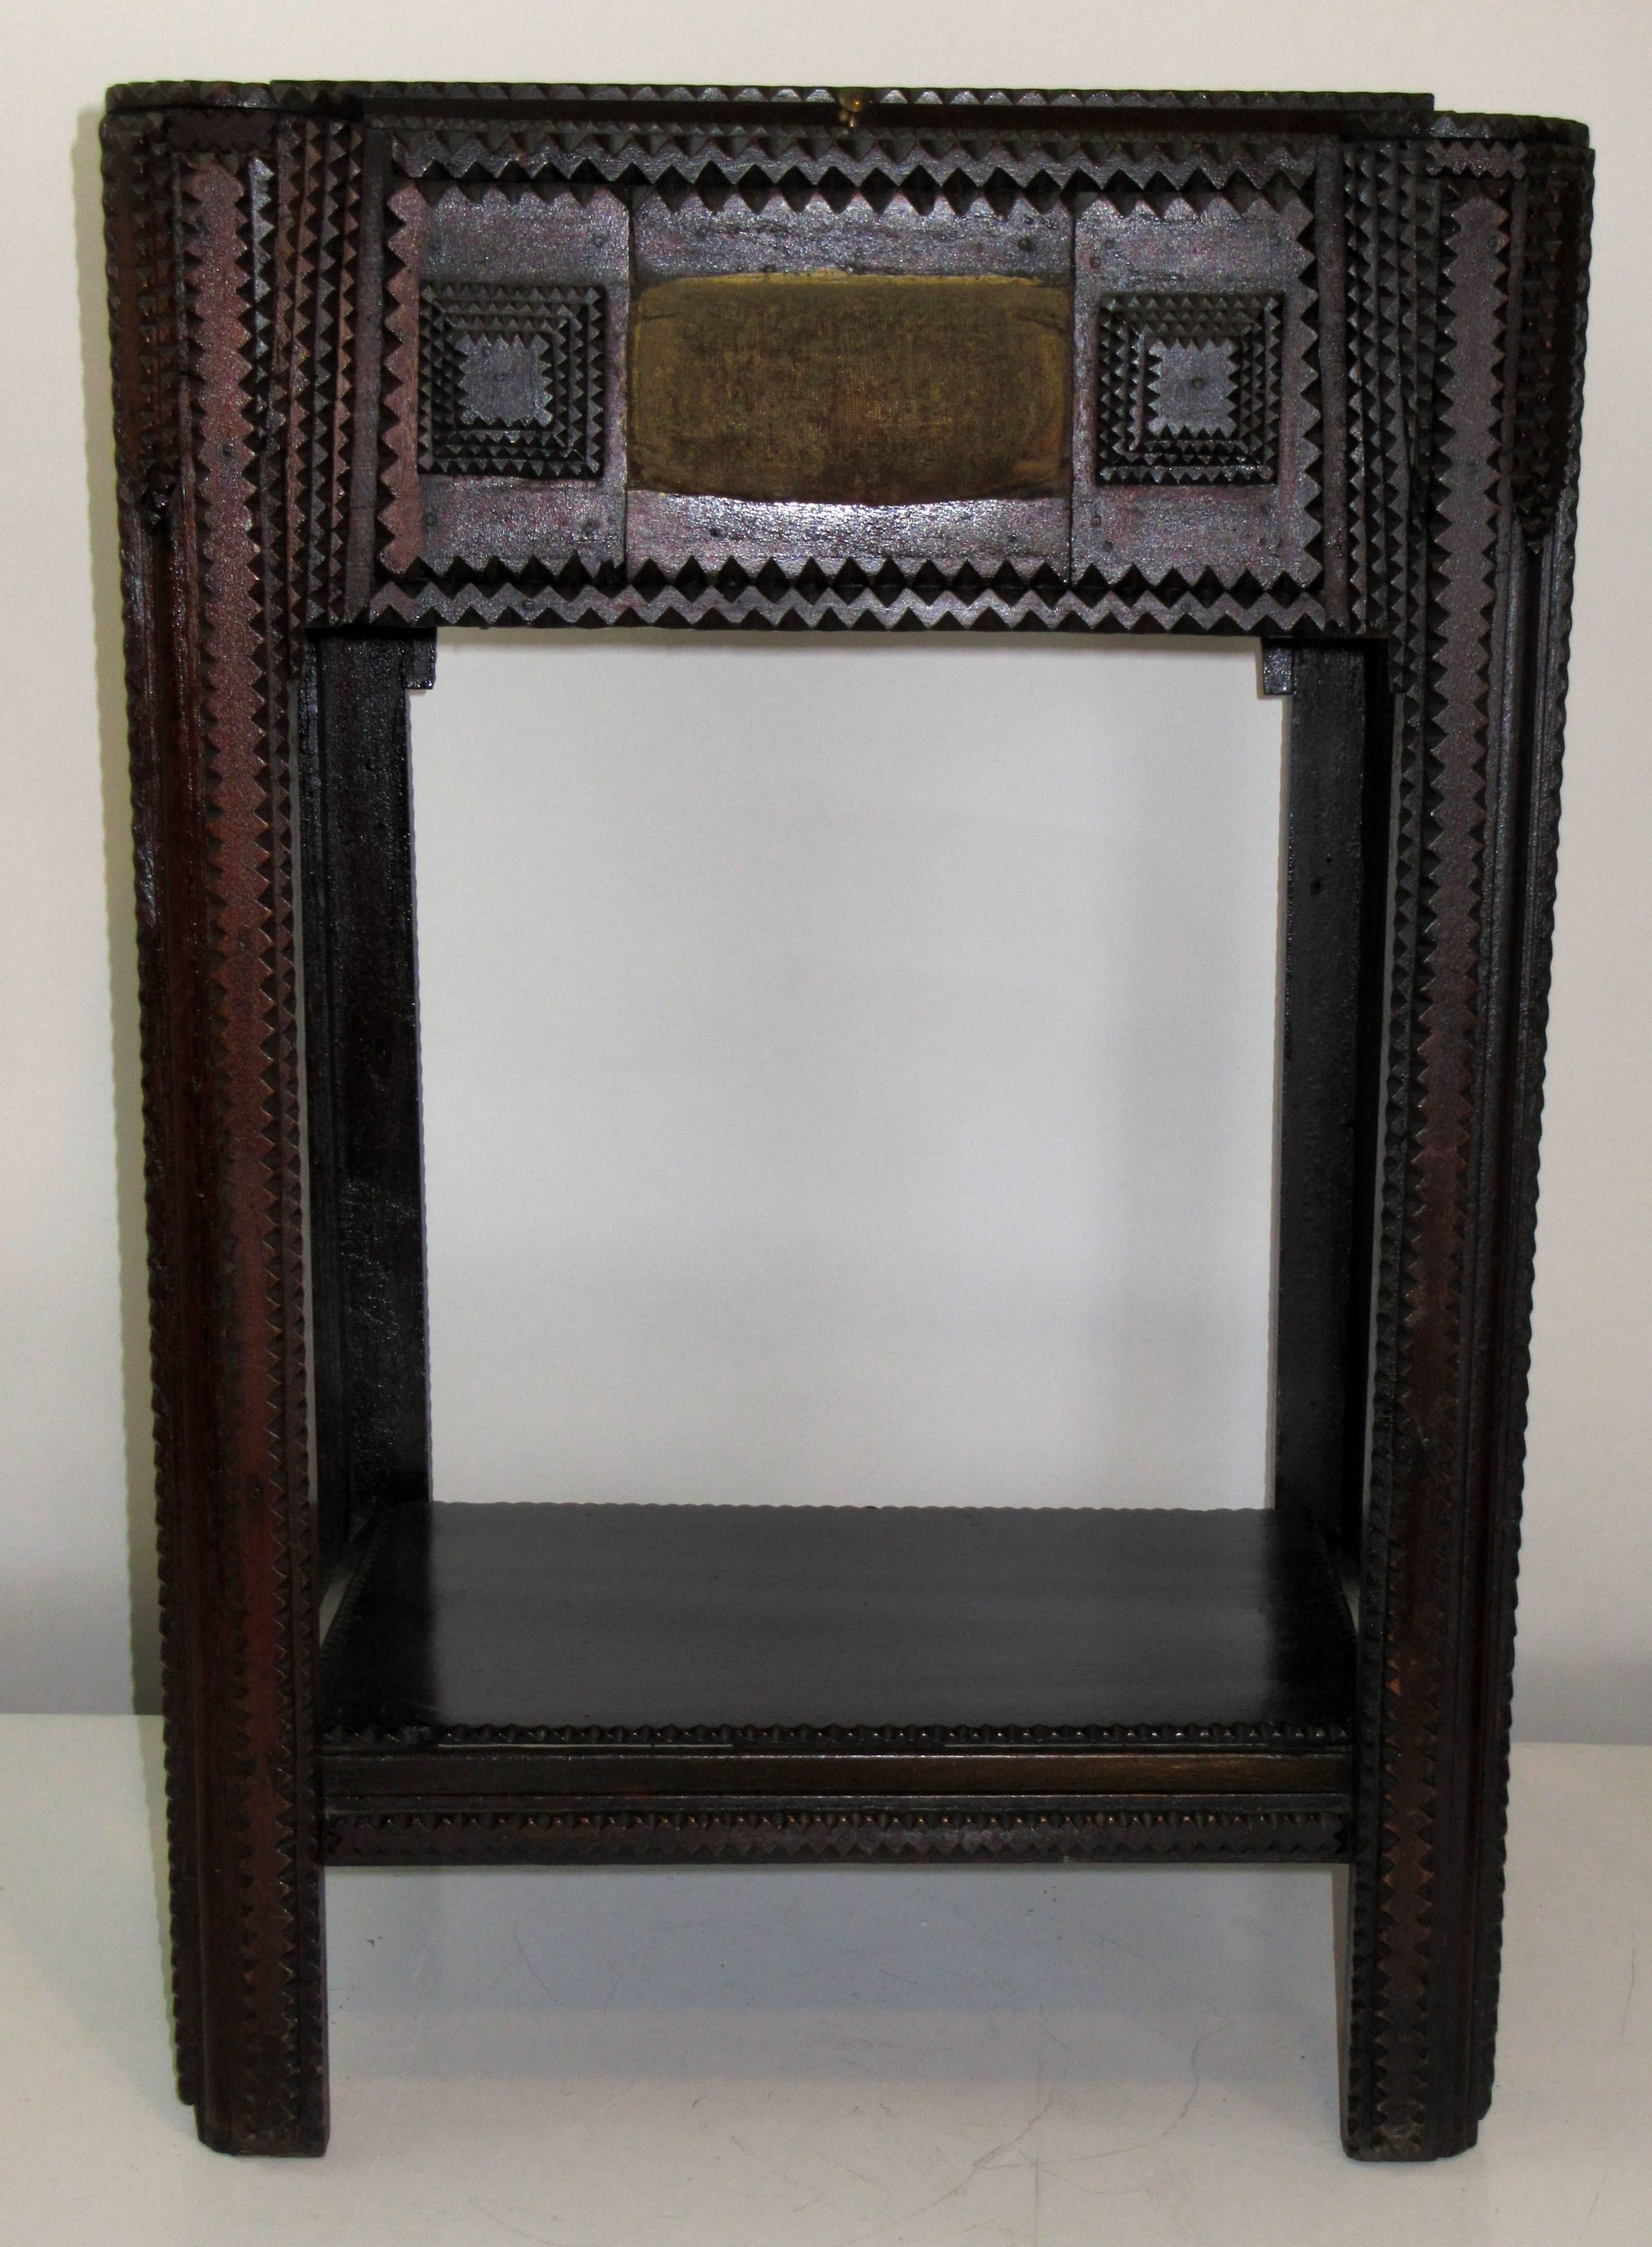 A hand-carved sewing box stand.